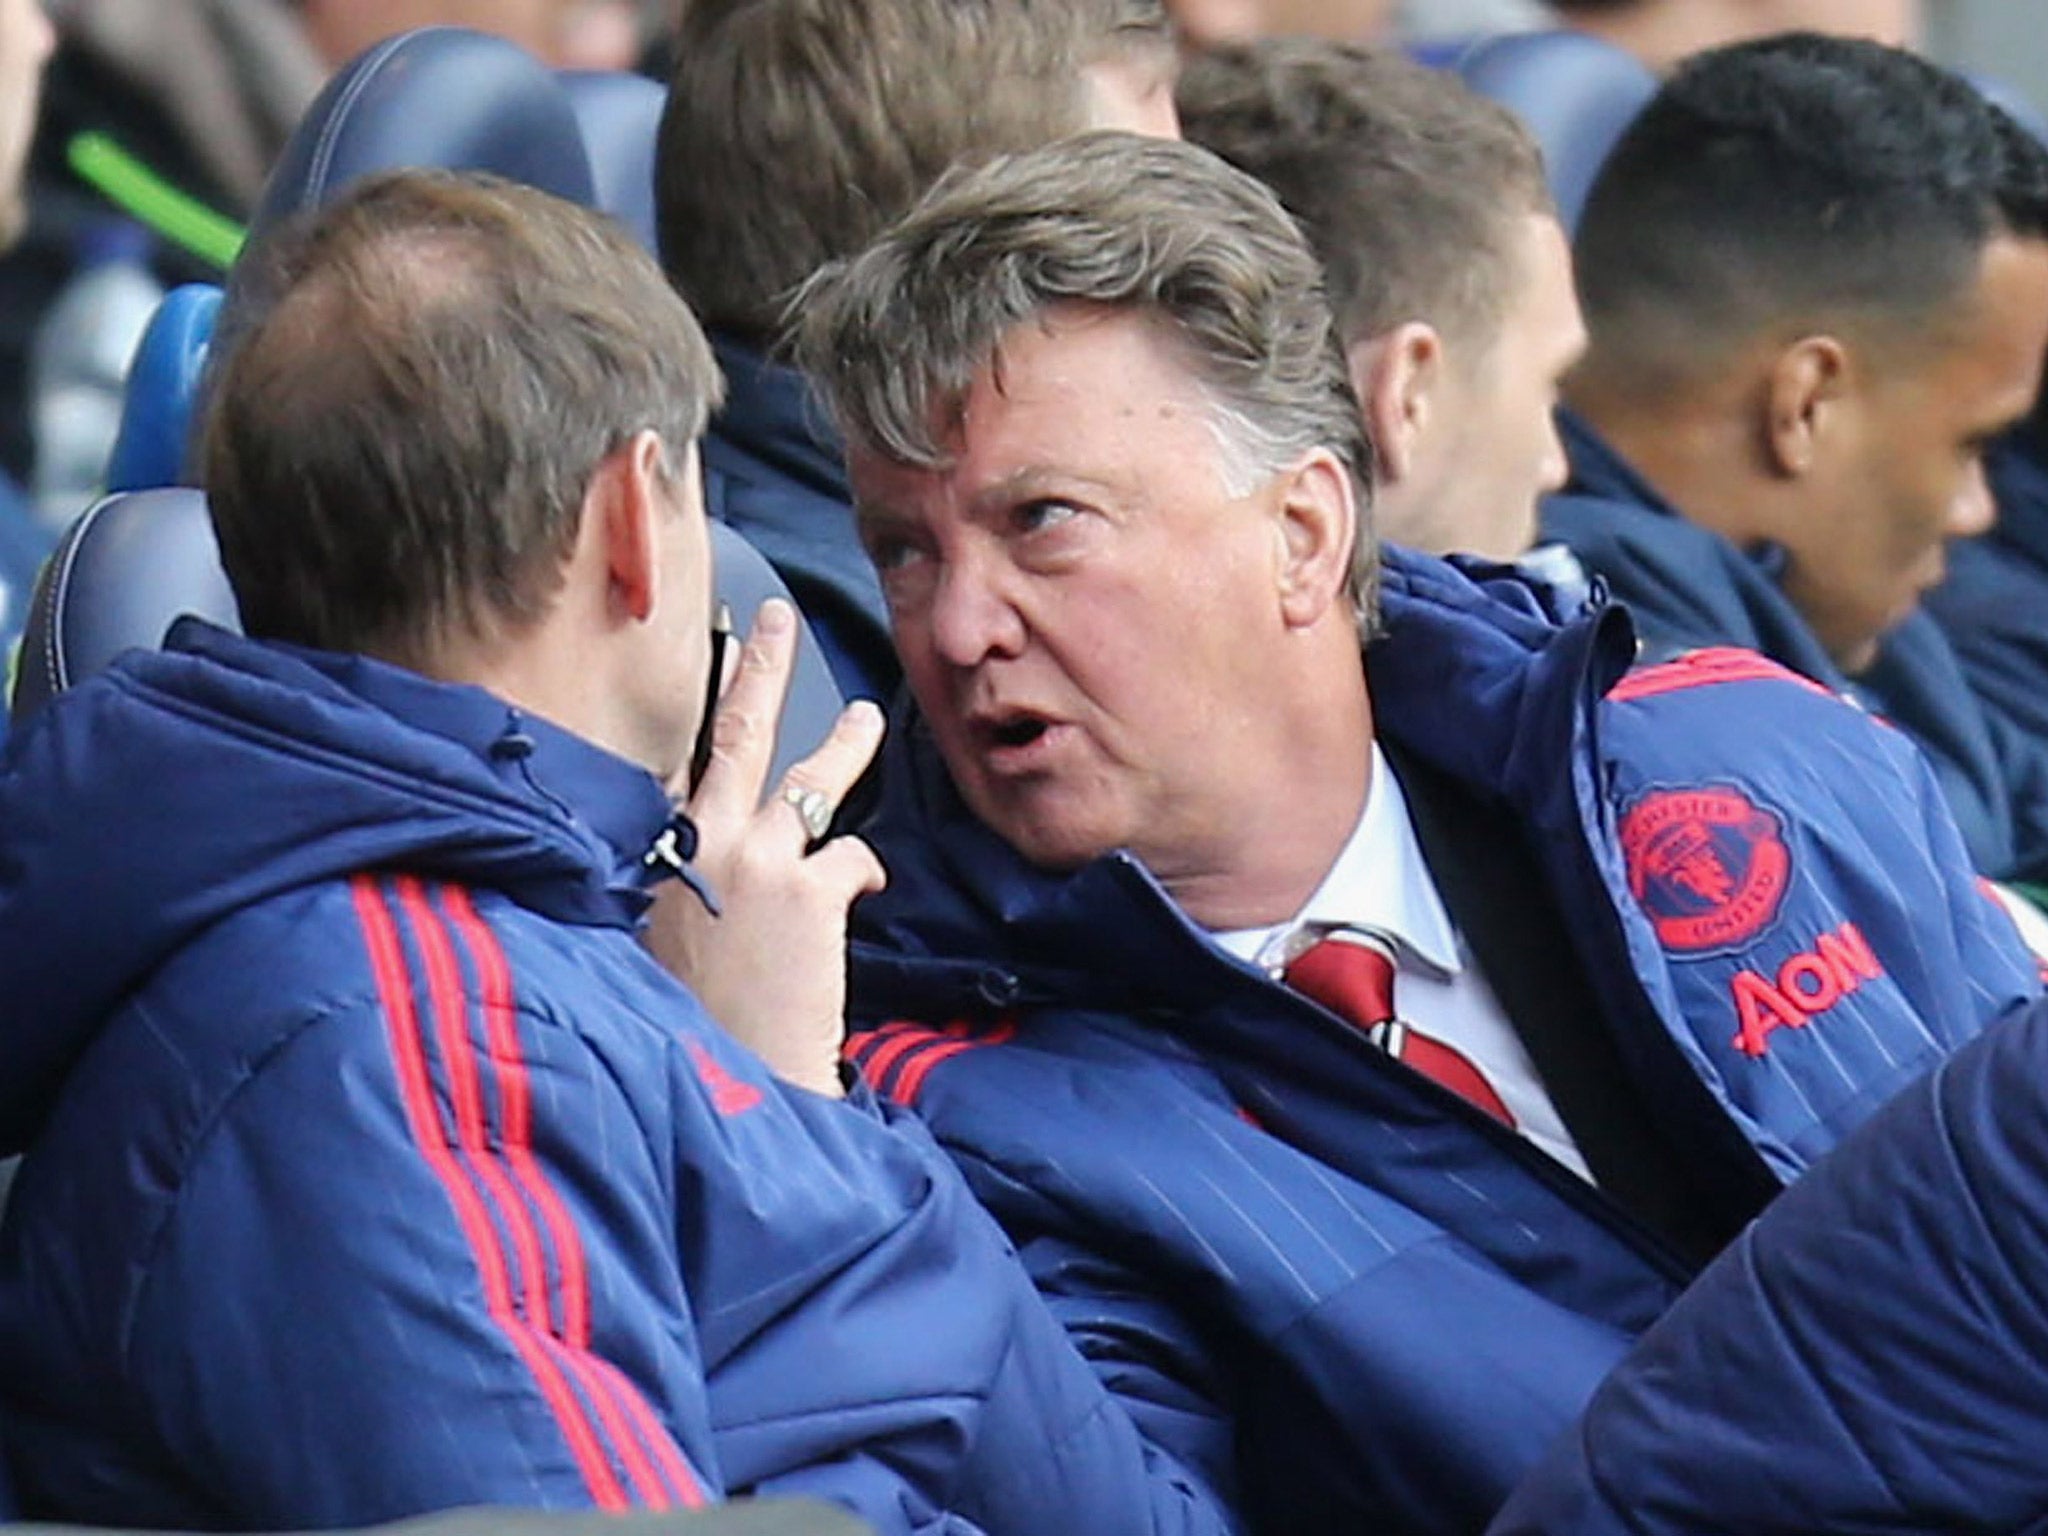 Manchester United manager Louis van Gaal is believed to have angered the first-team squad during the defeat by Spurs